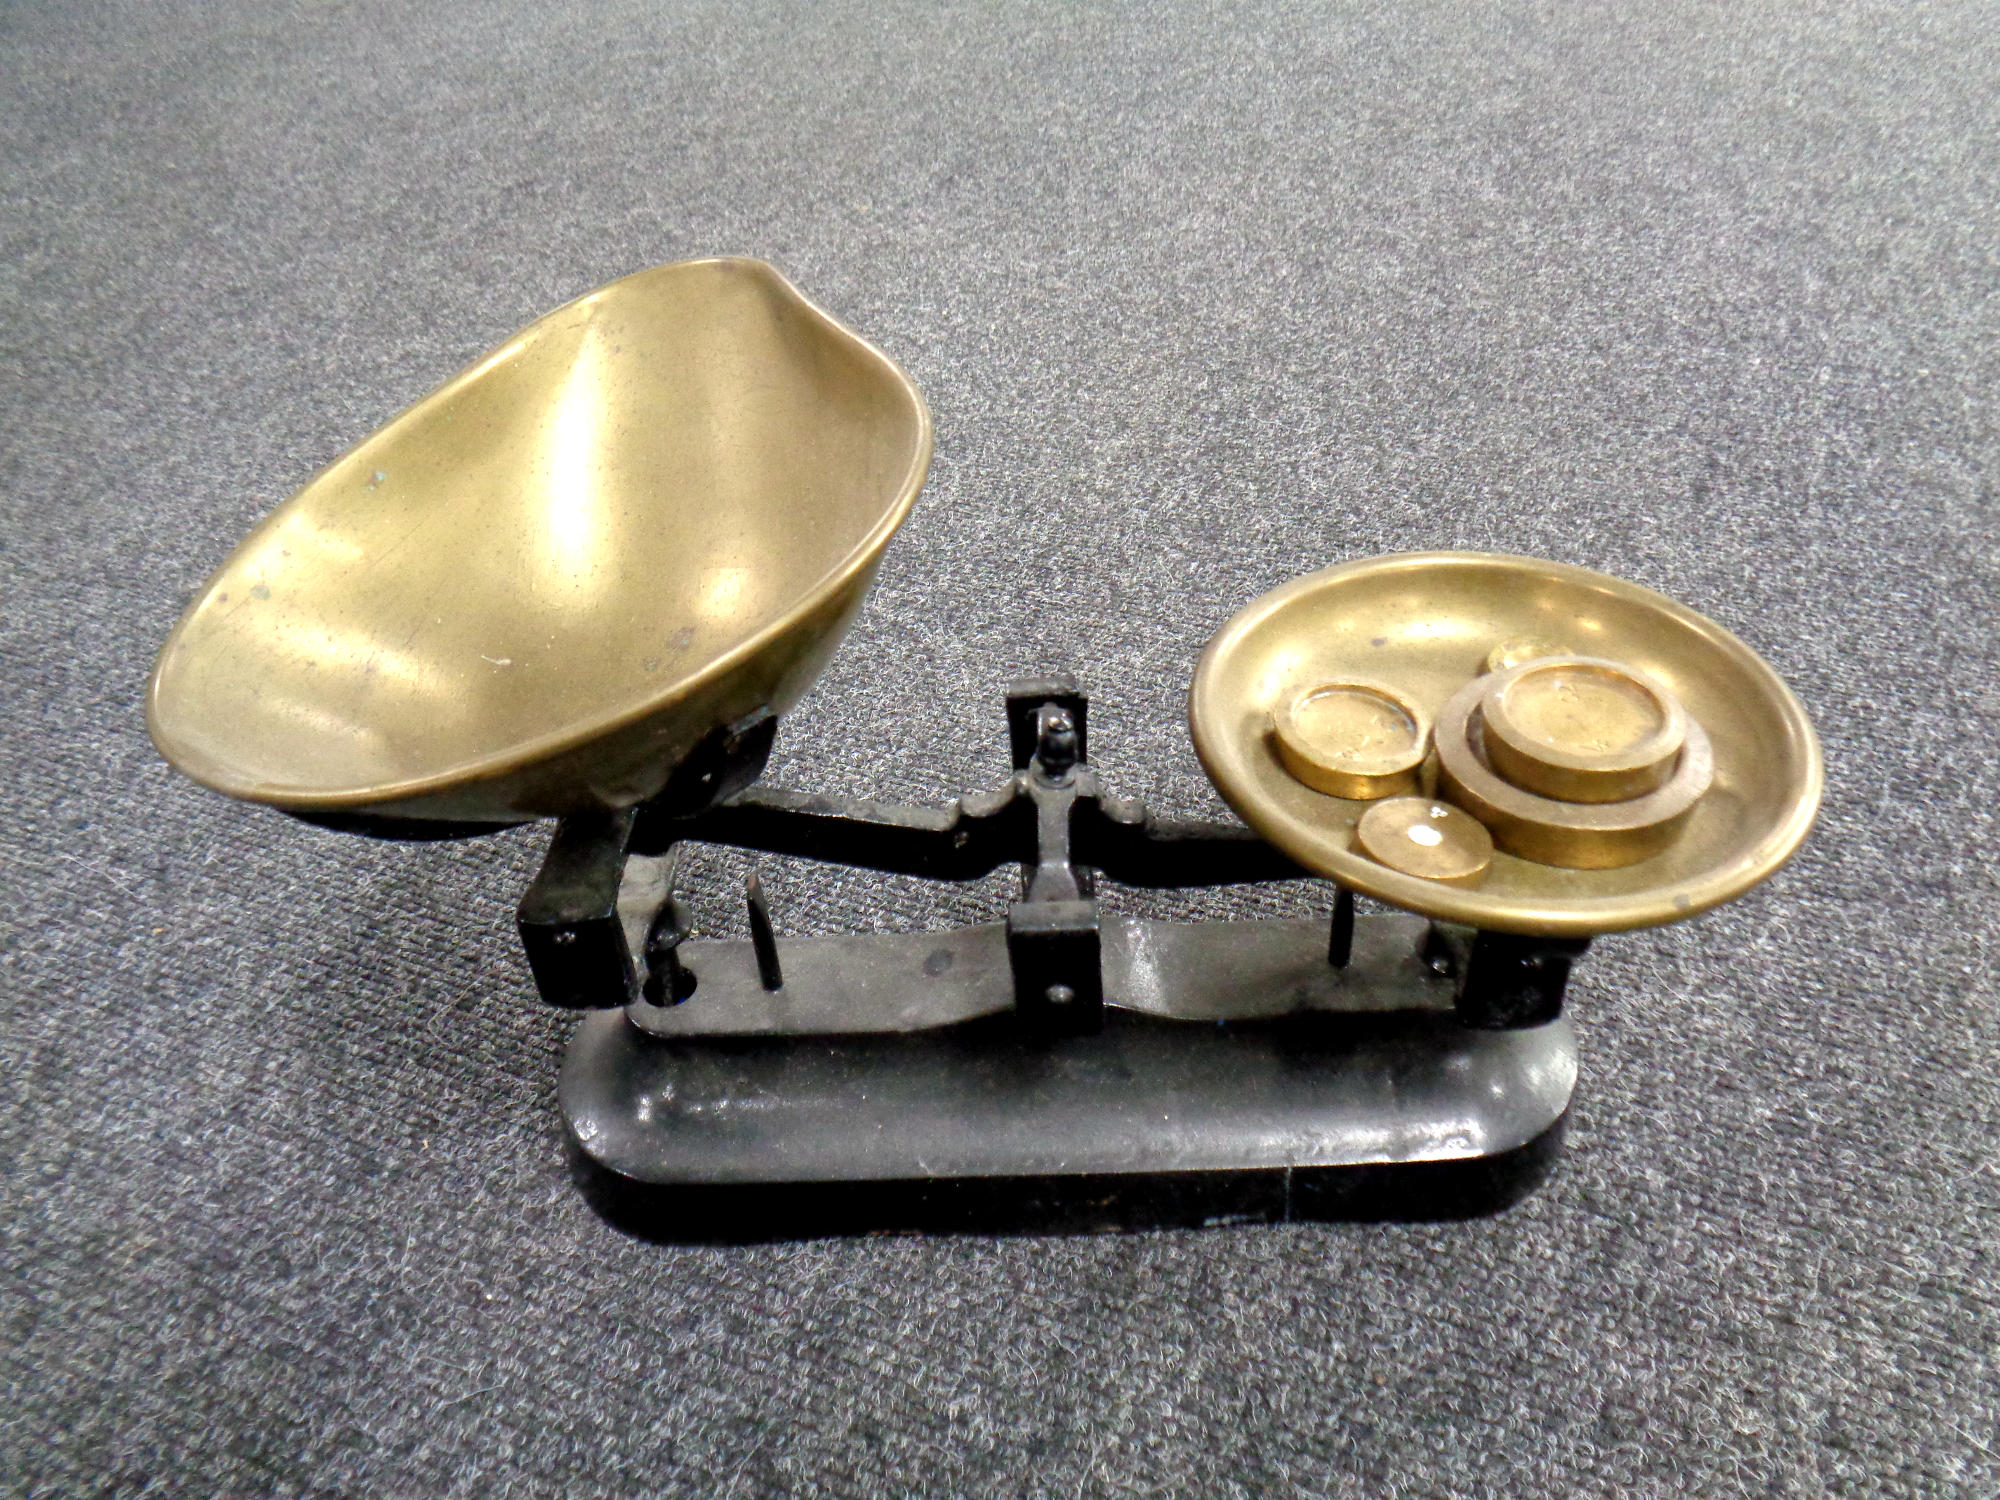 A vintage set of kitchen scales with brass weights